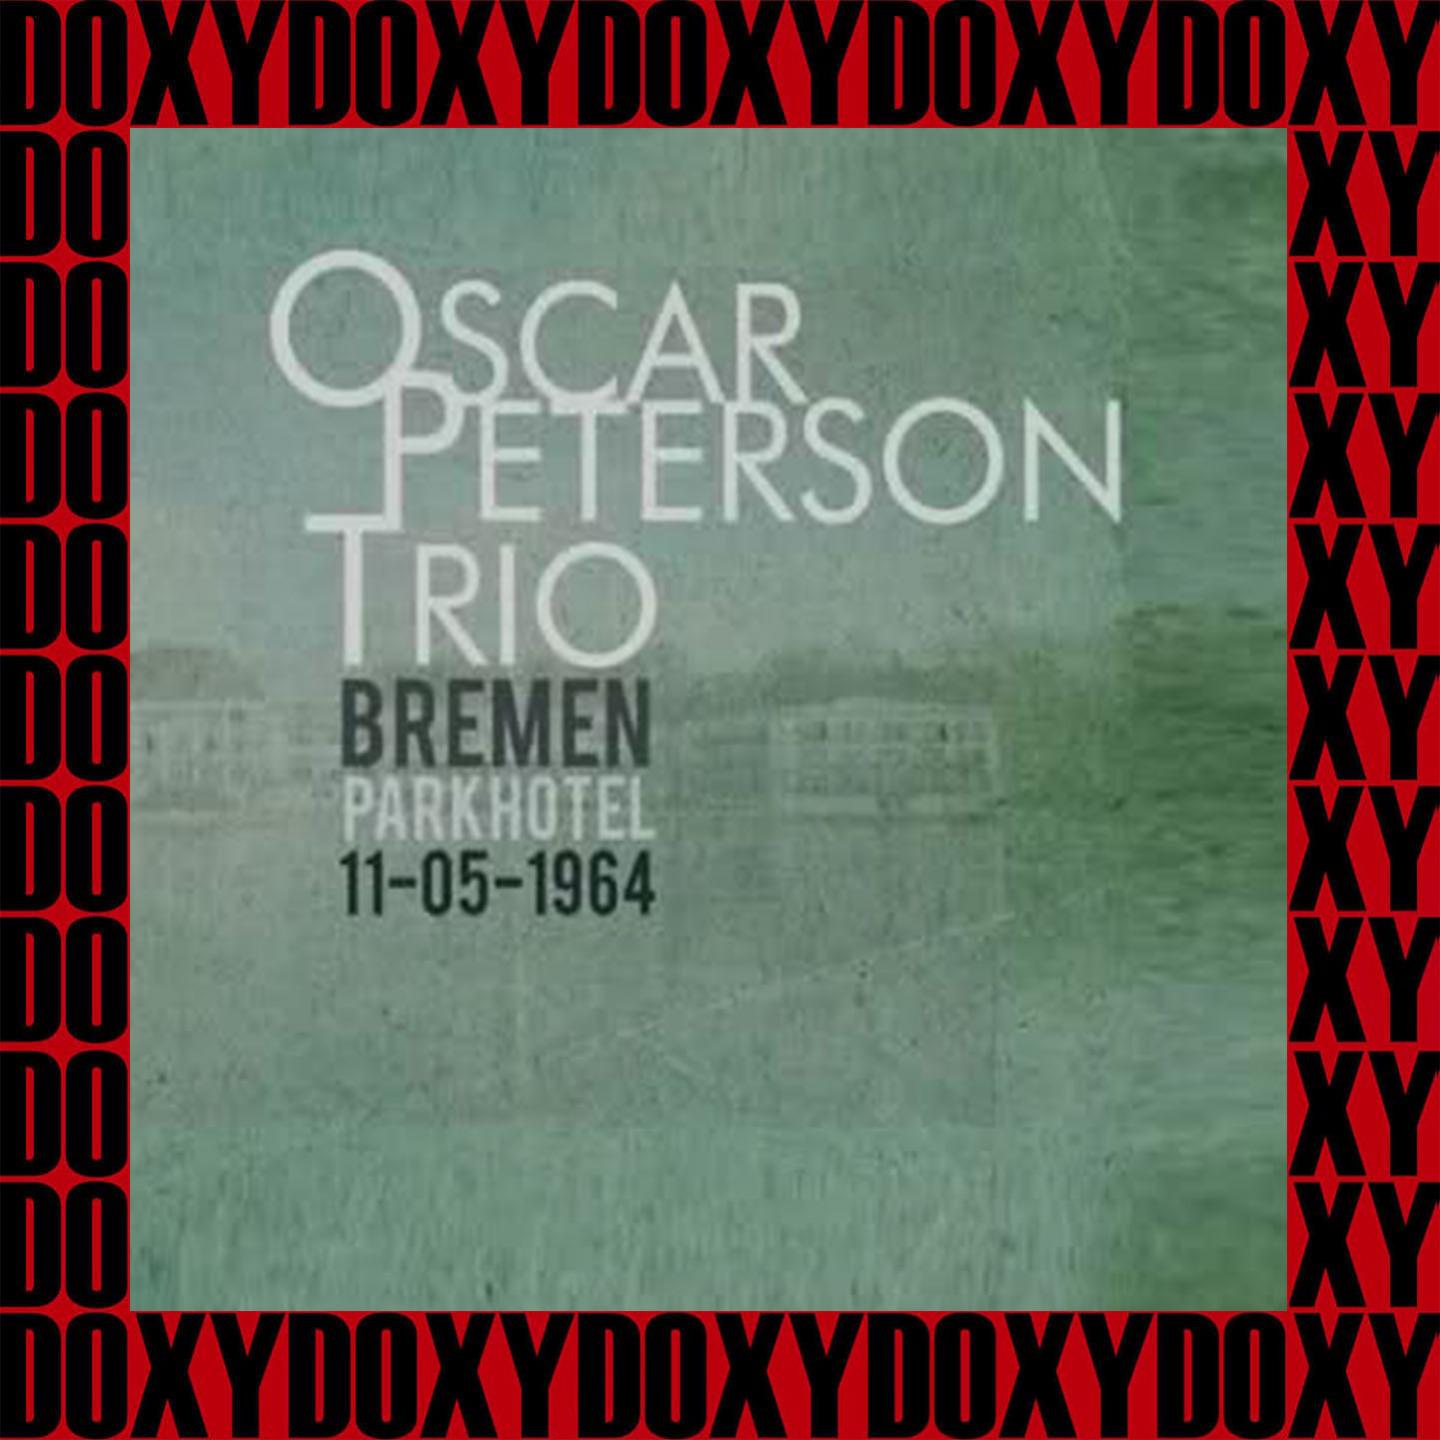 Live In Bremen (Remastered Version) (Doxy Collection)